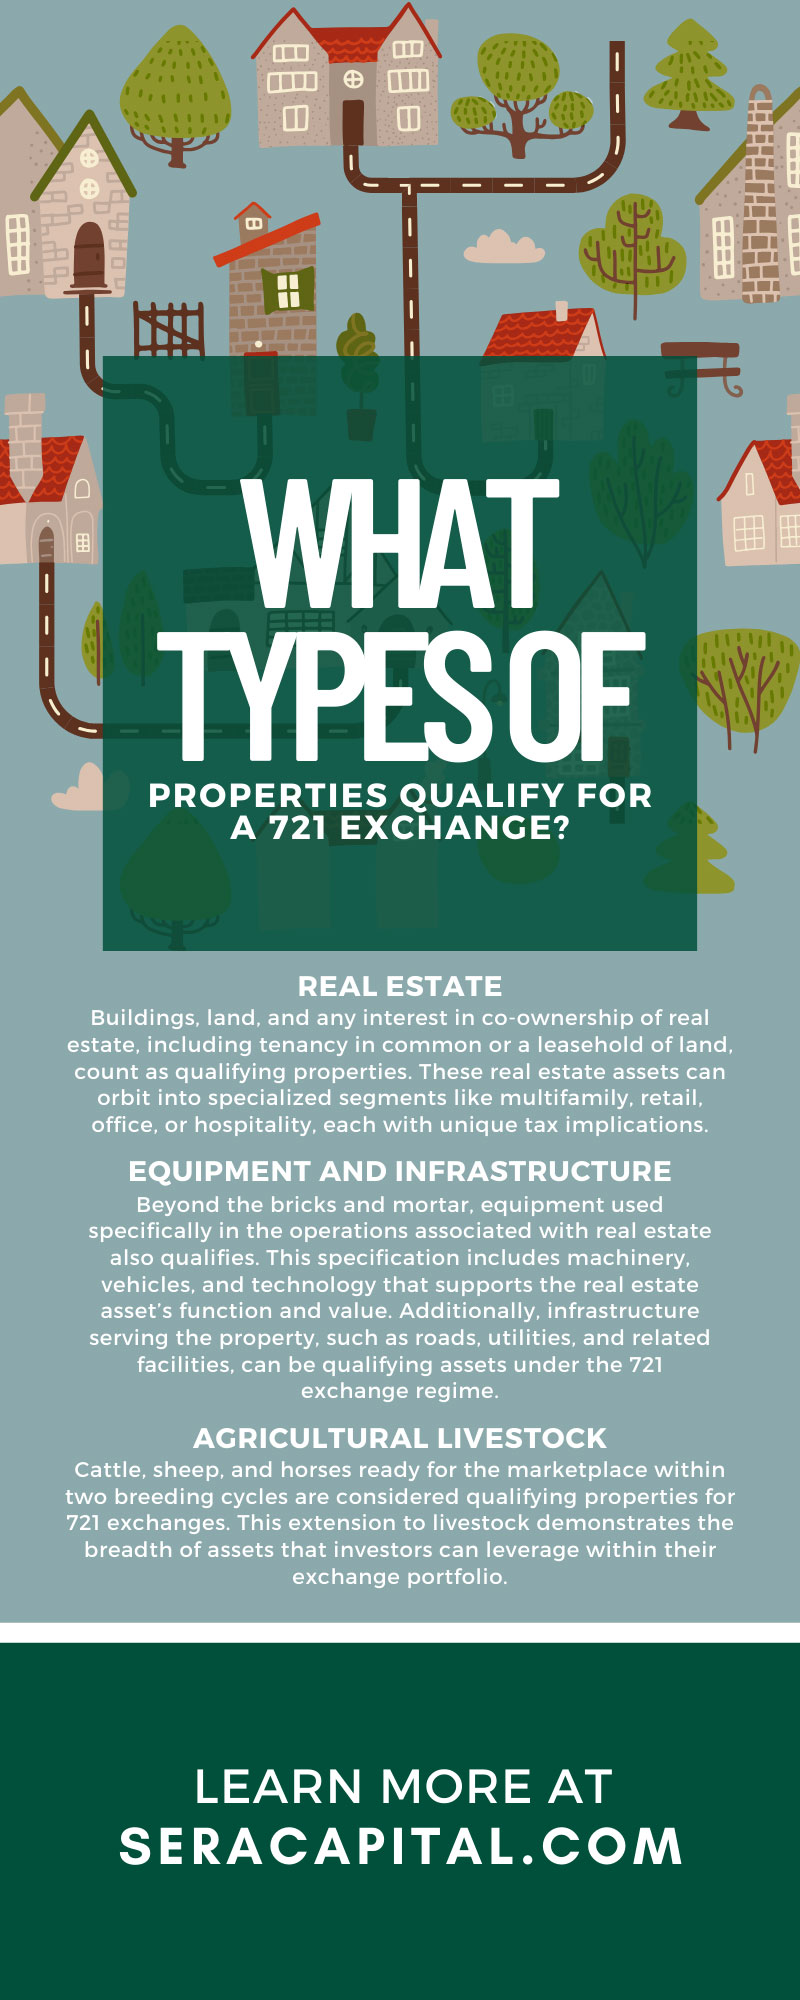 What Types of Properties Qualify for a 721 Exchange?